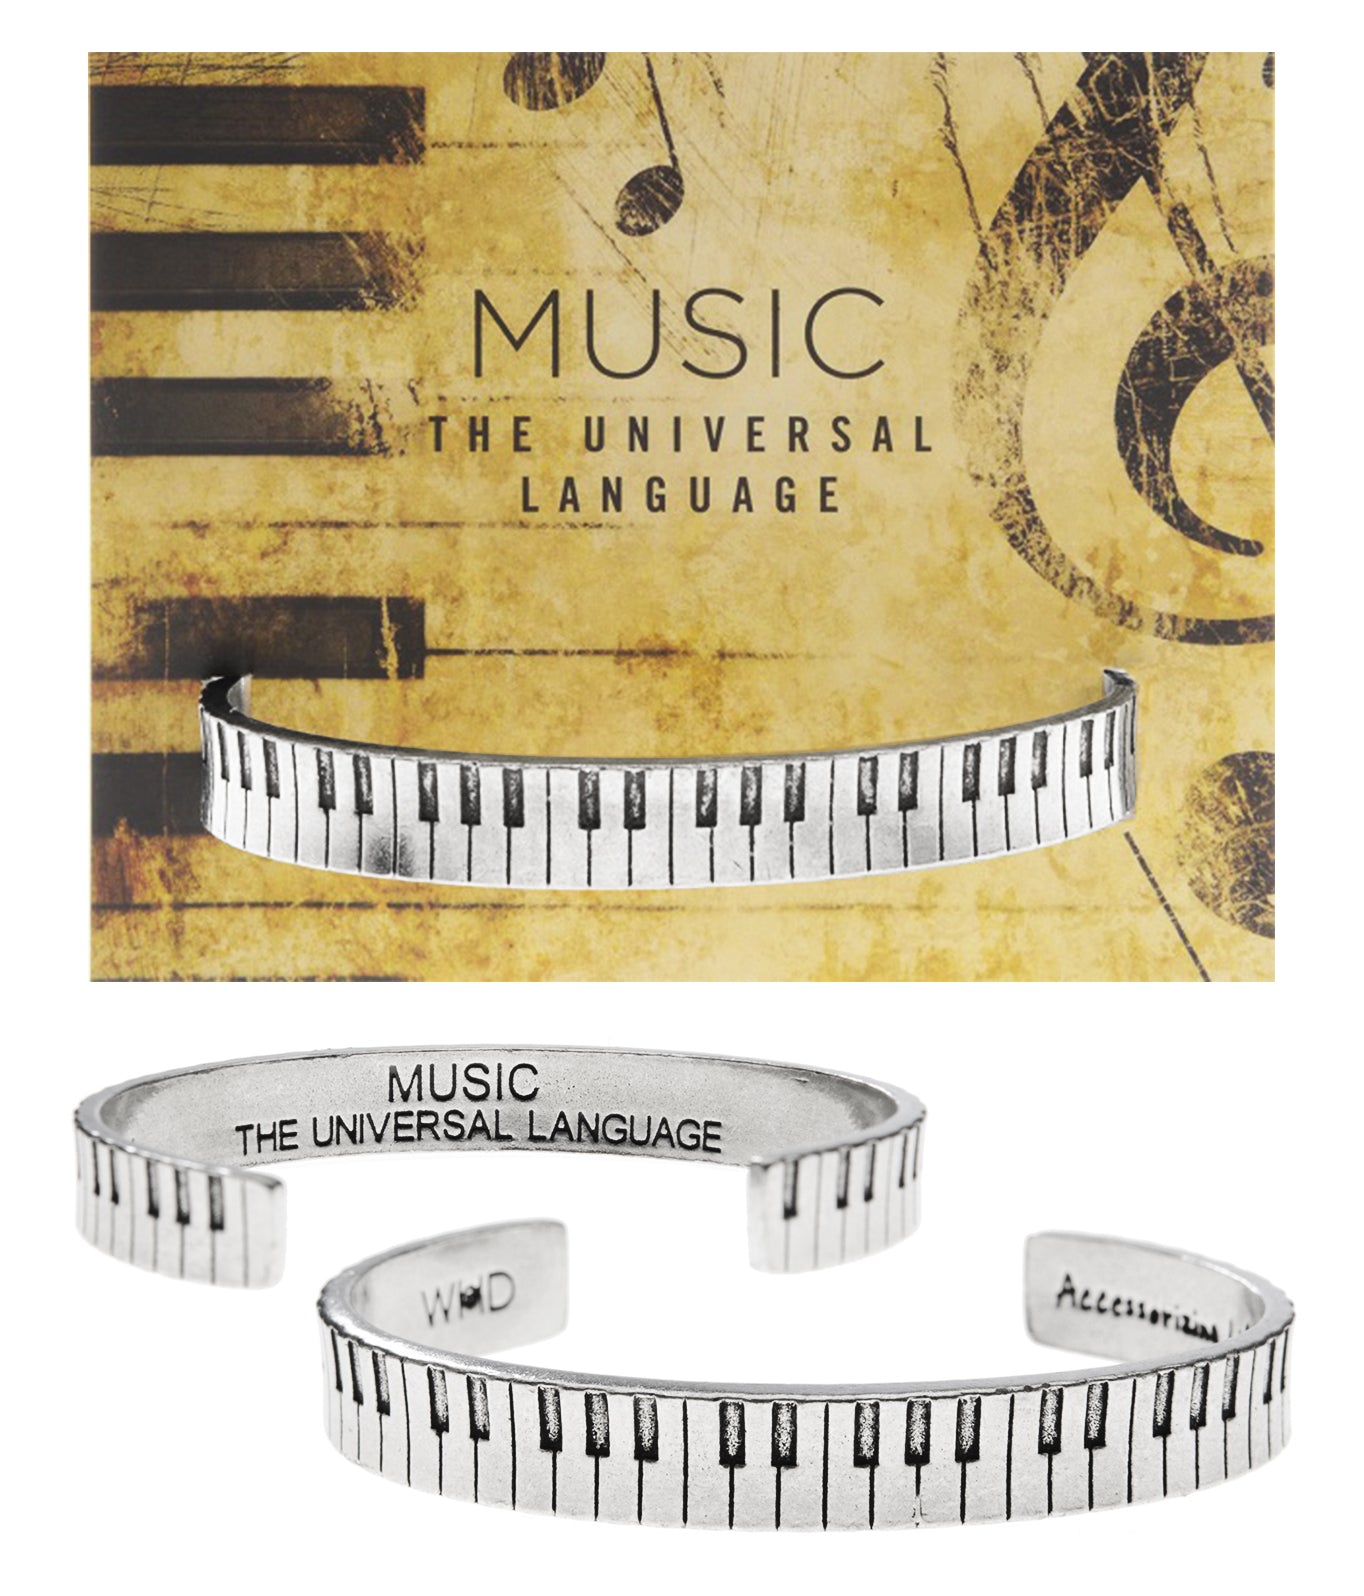 Piano Player Cuff Inspirational Bracelet - Gift for Teachers, Musicians & Music Students with backer card